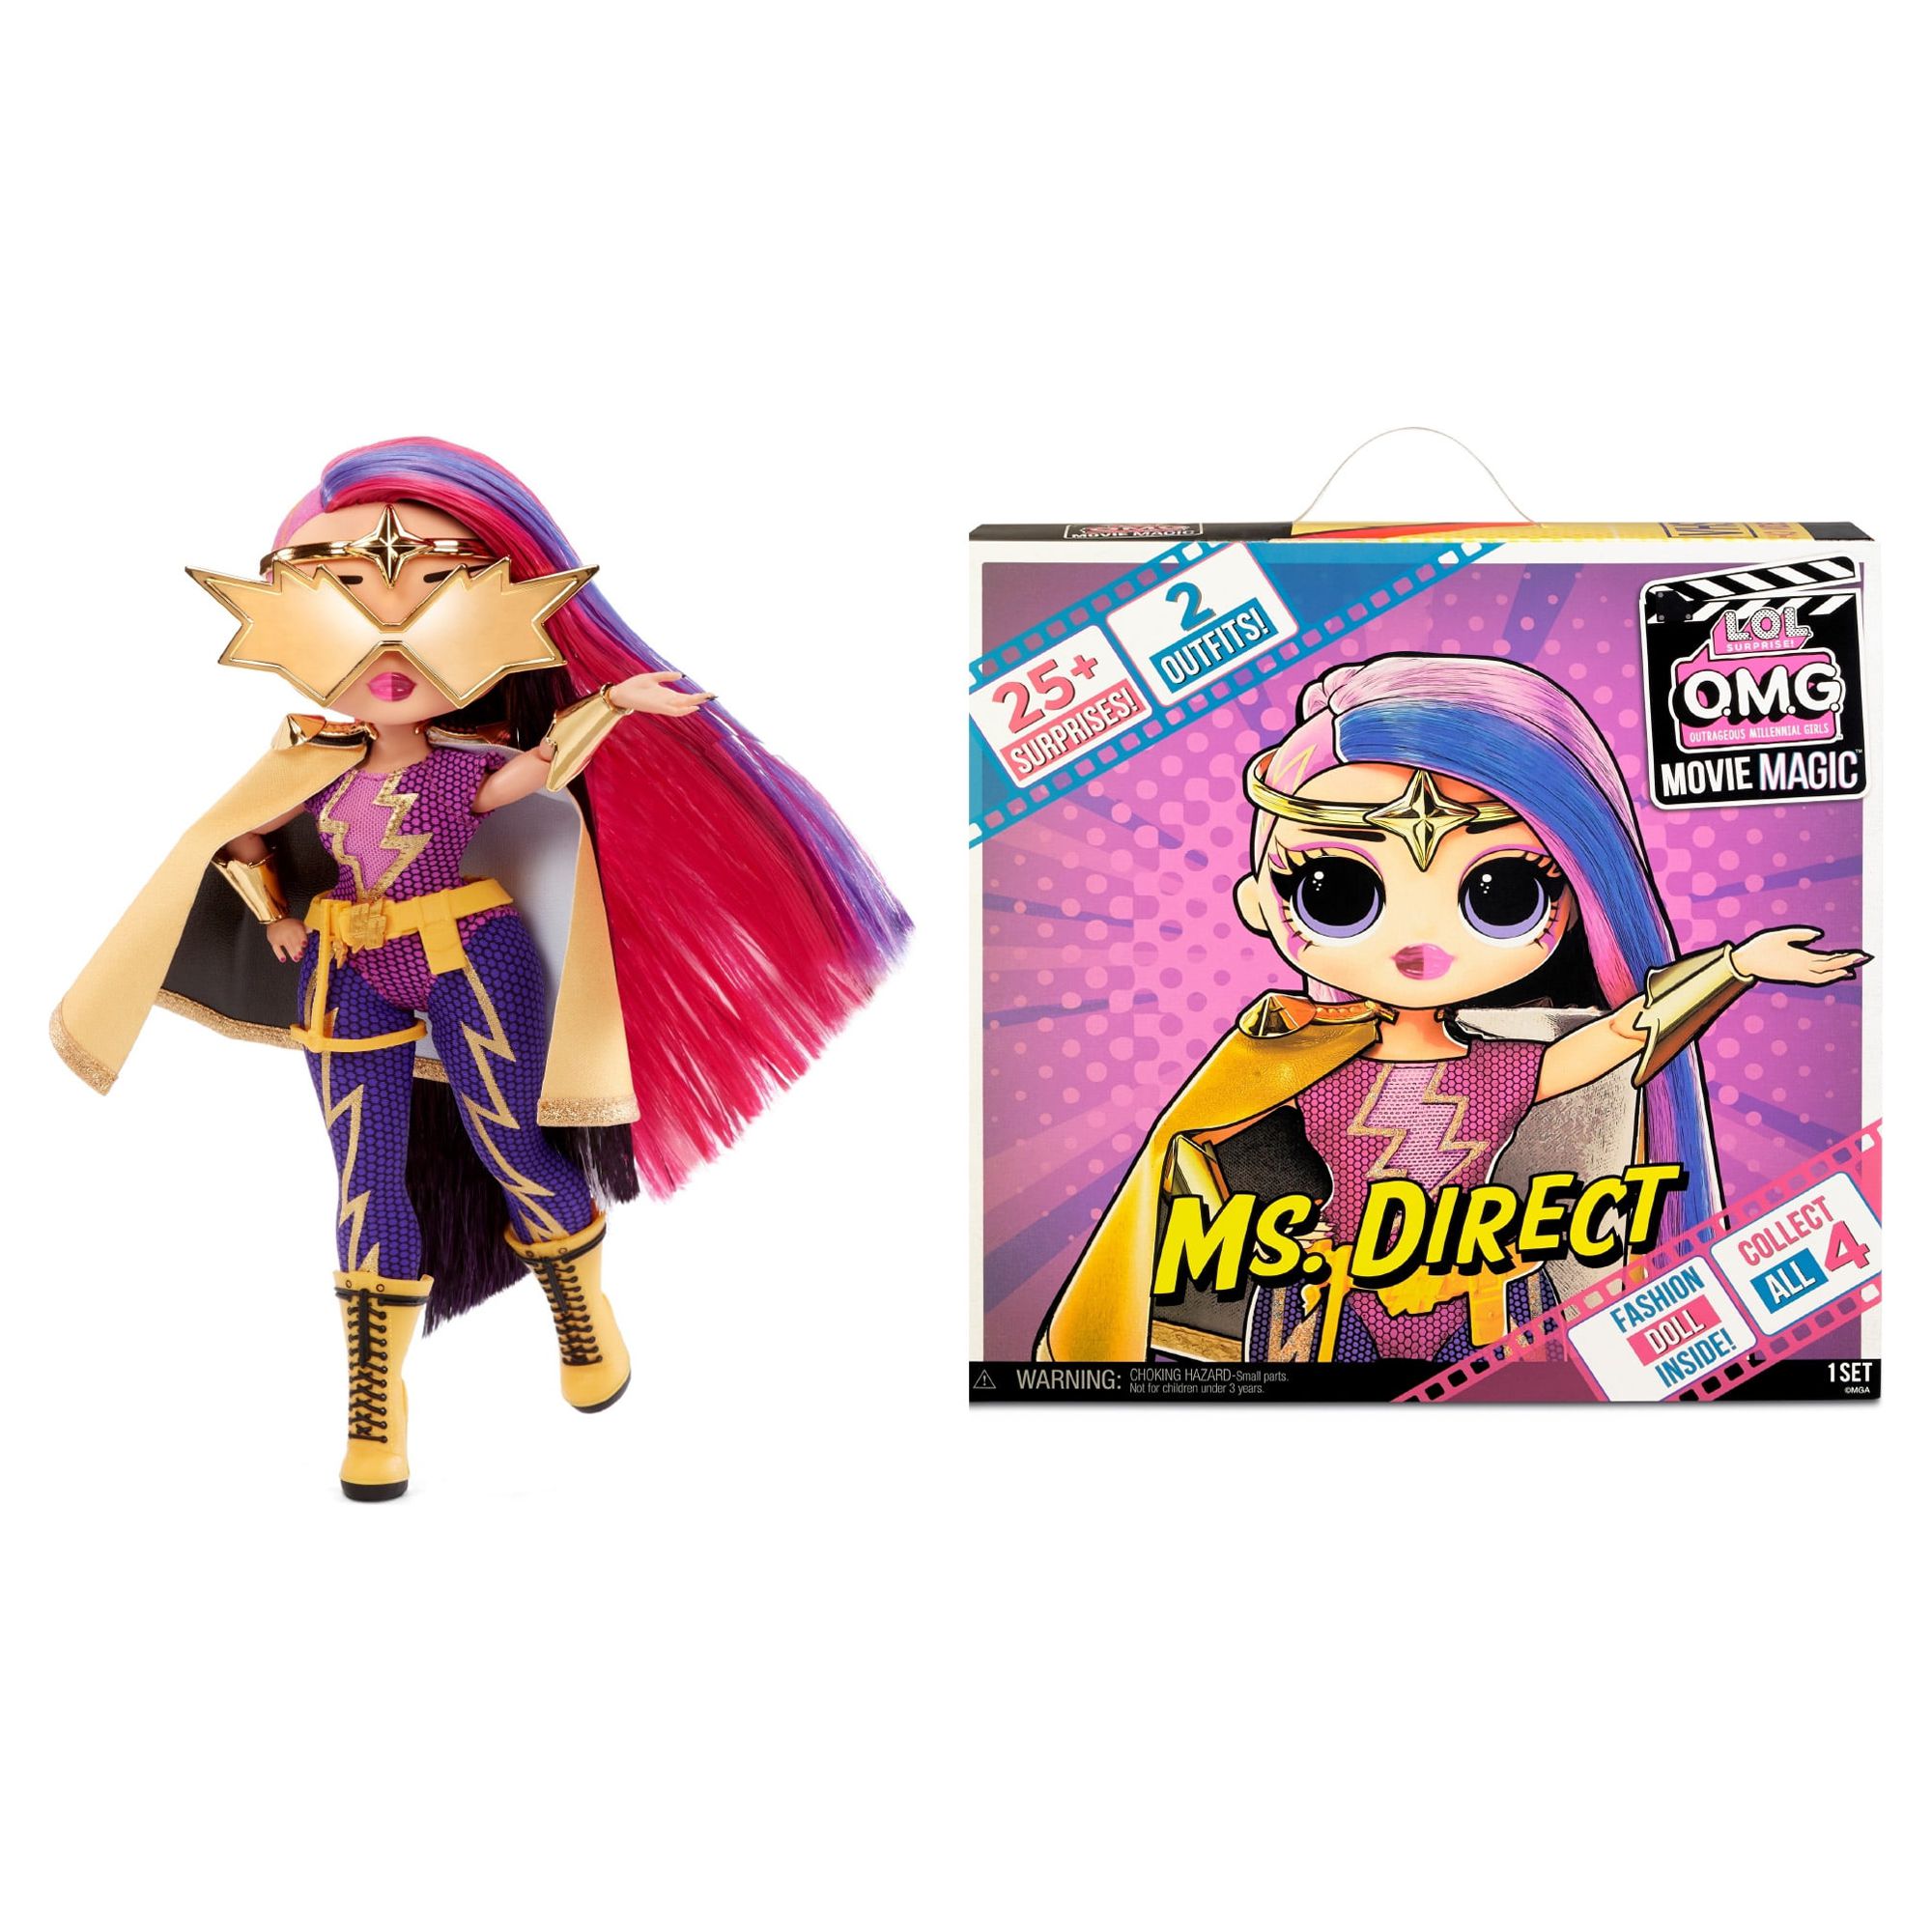 LOL Surprise Omg Movie Magic Ms. Direct Fashion Doll with 25 Surprises and Playset, Ages 4 and up - image 3 of 6